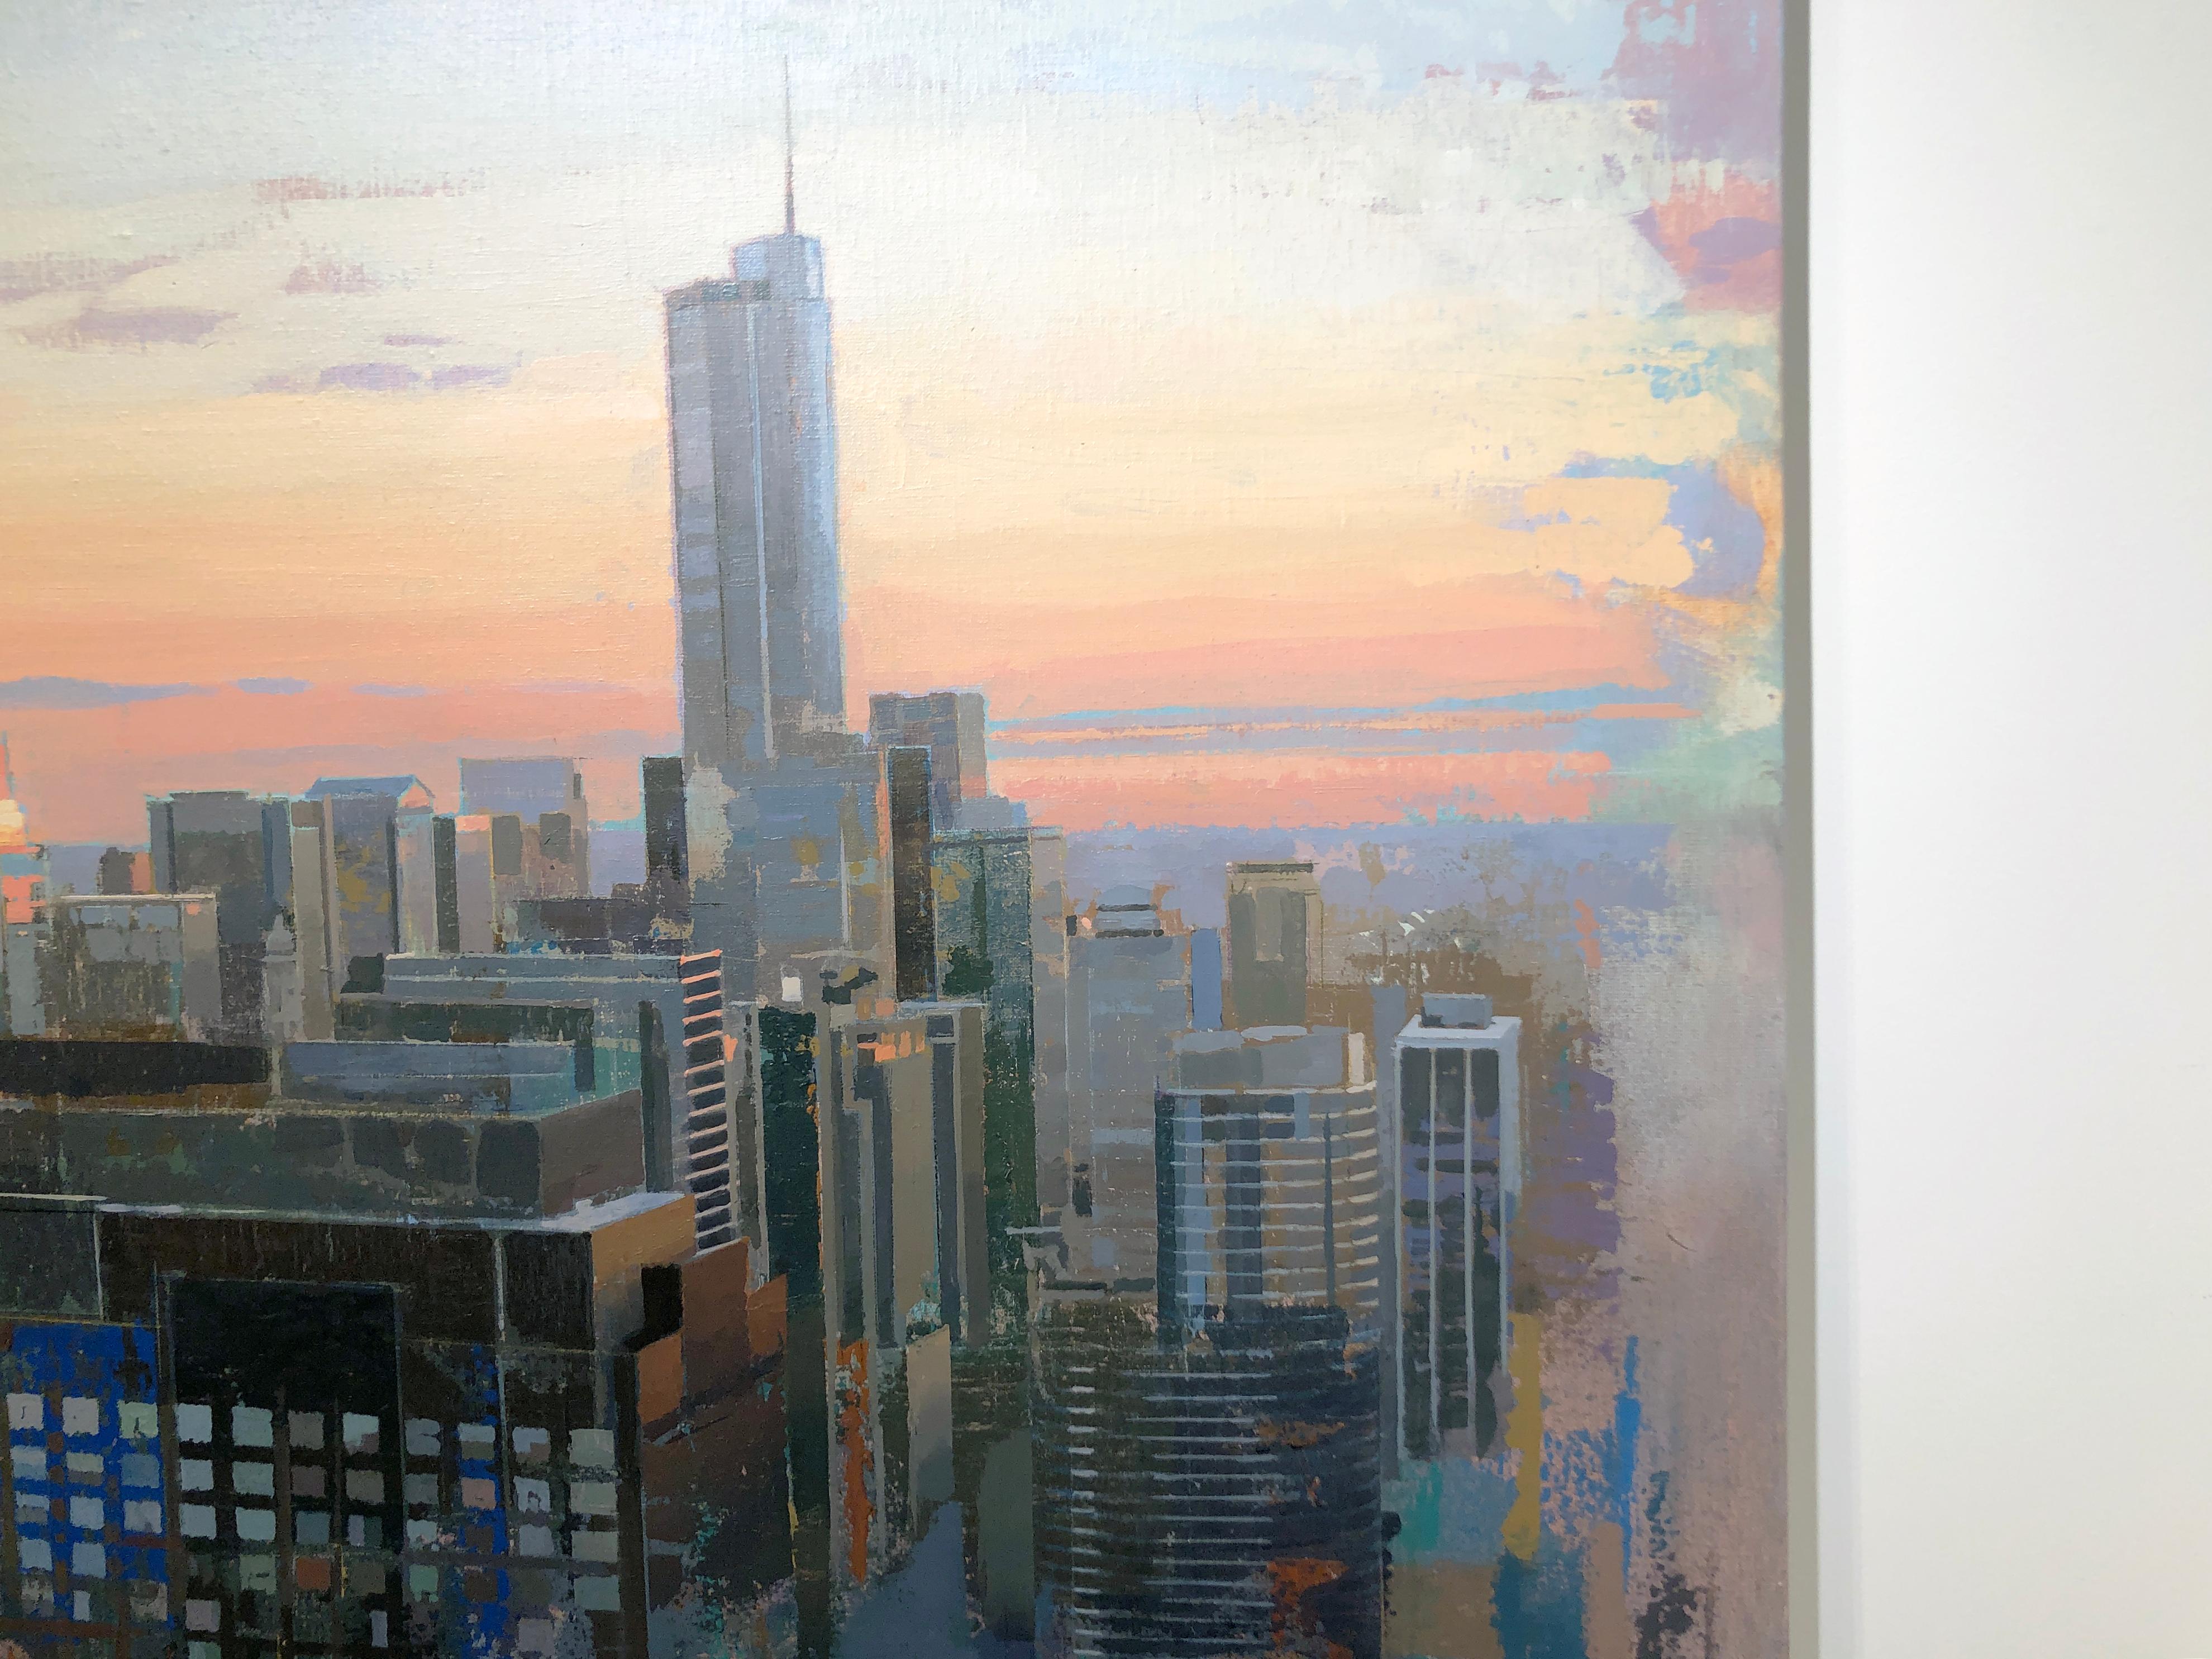 From Lake Point Towers, Birds Eye View of Chicago Looking East, Oil & Acrylic - Contemporary Painting by Albert Vidal Moreno